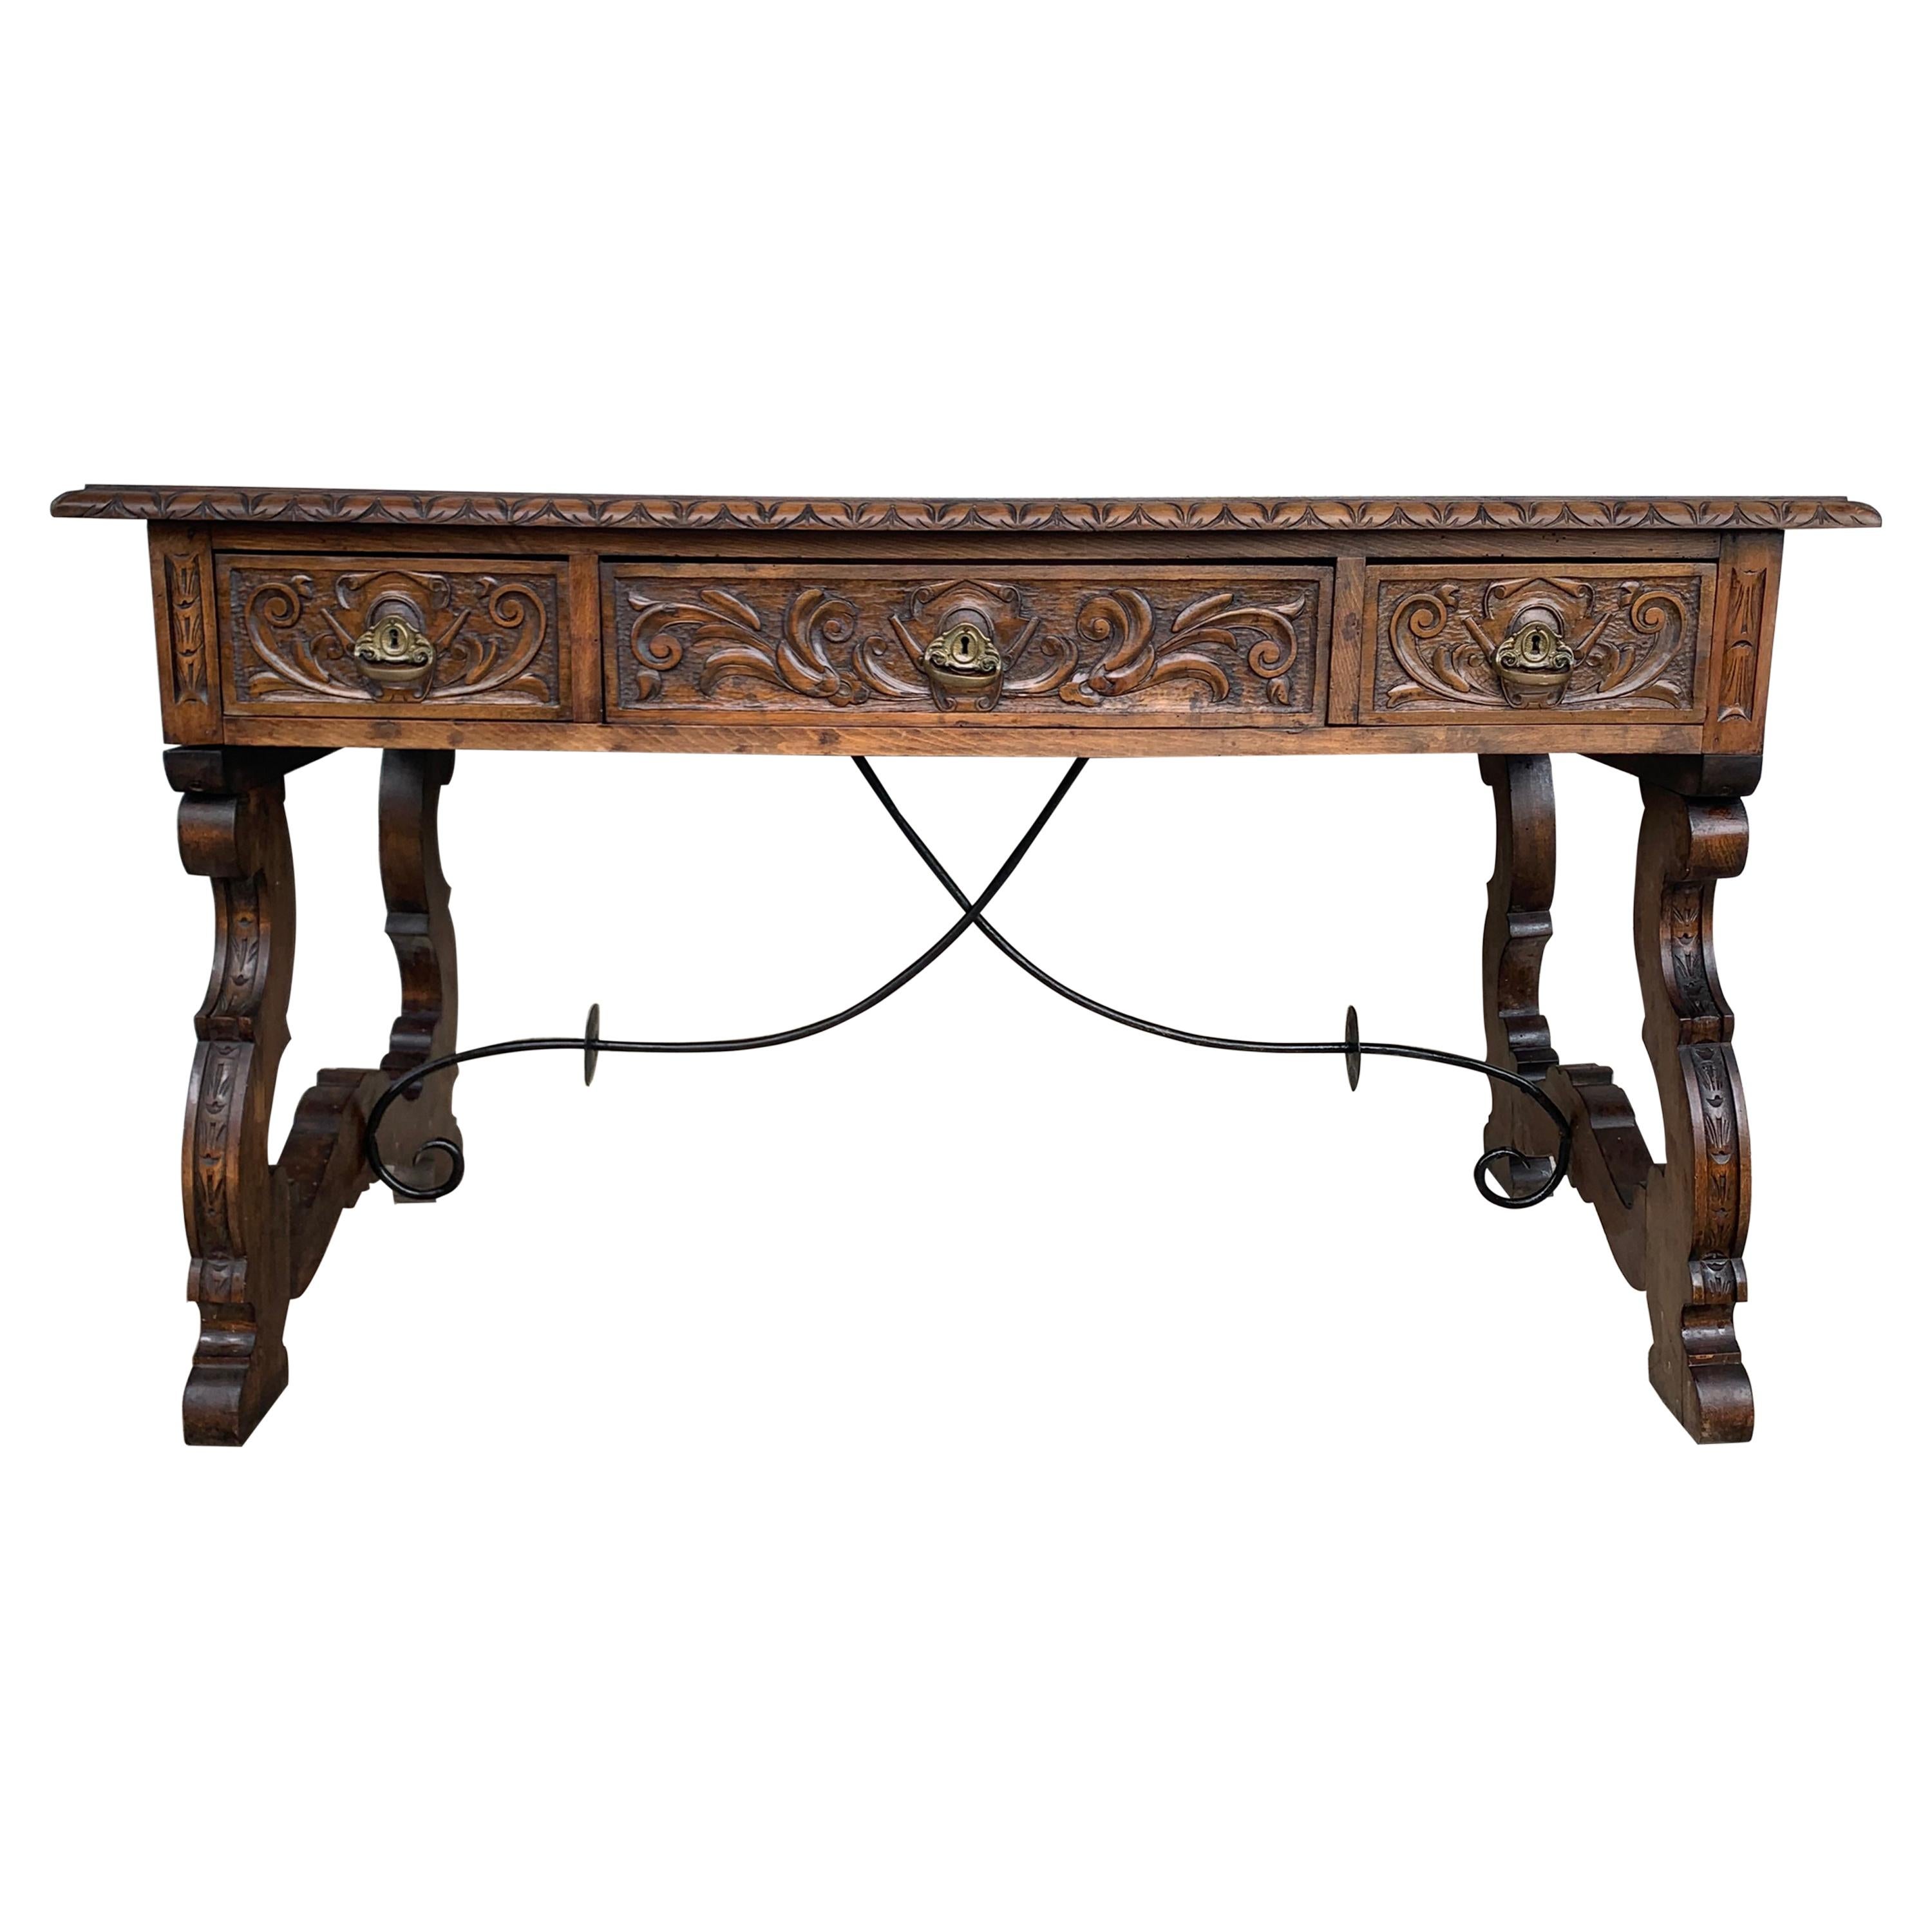 20th Century Spanish Baroque Style Oak Library Table or Desk